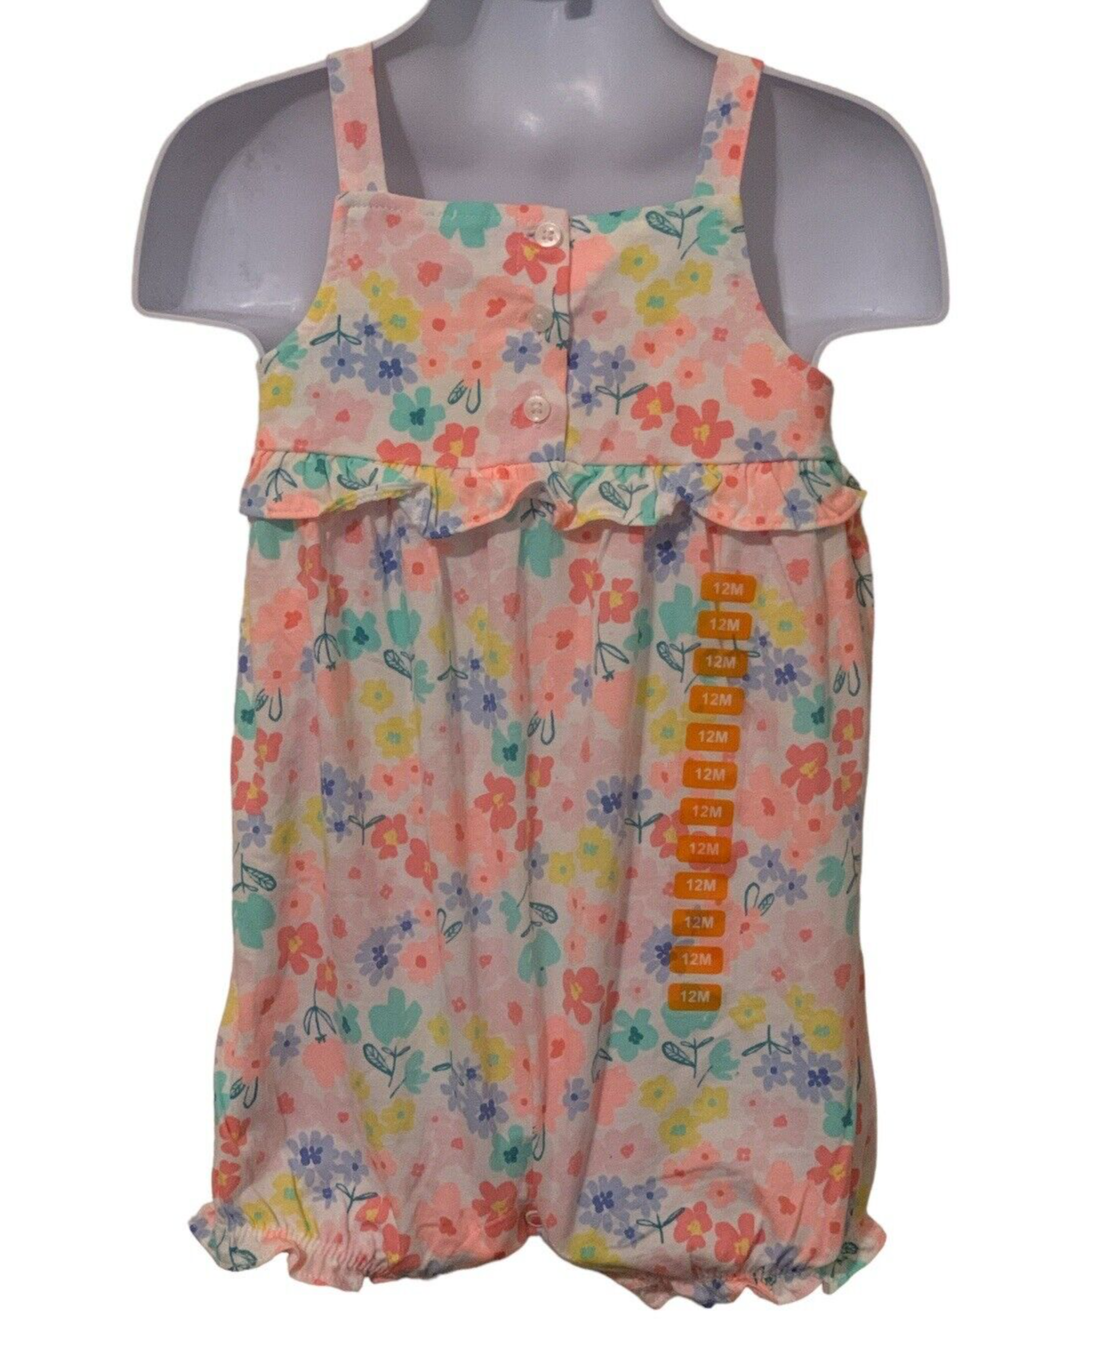 Primary image for Carters Baby Girls Floral Romper Size 12M Sleeveless